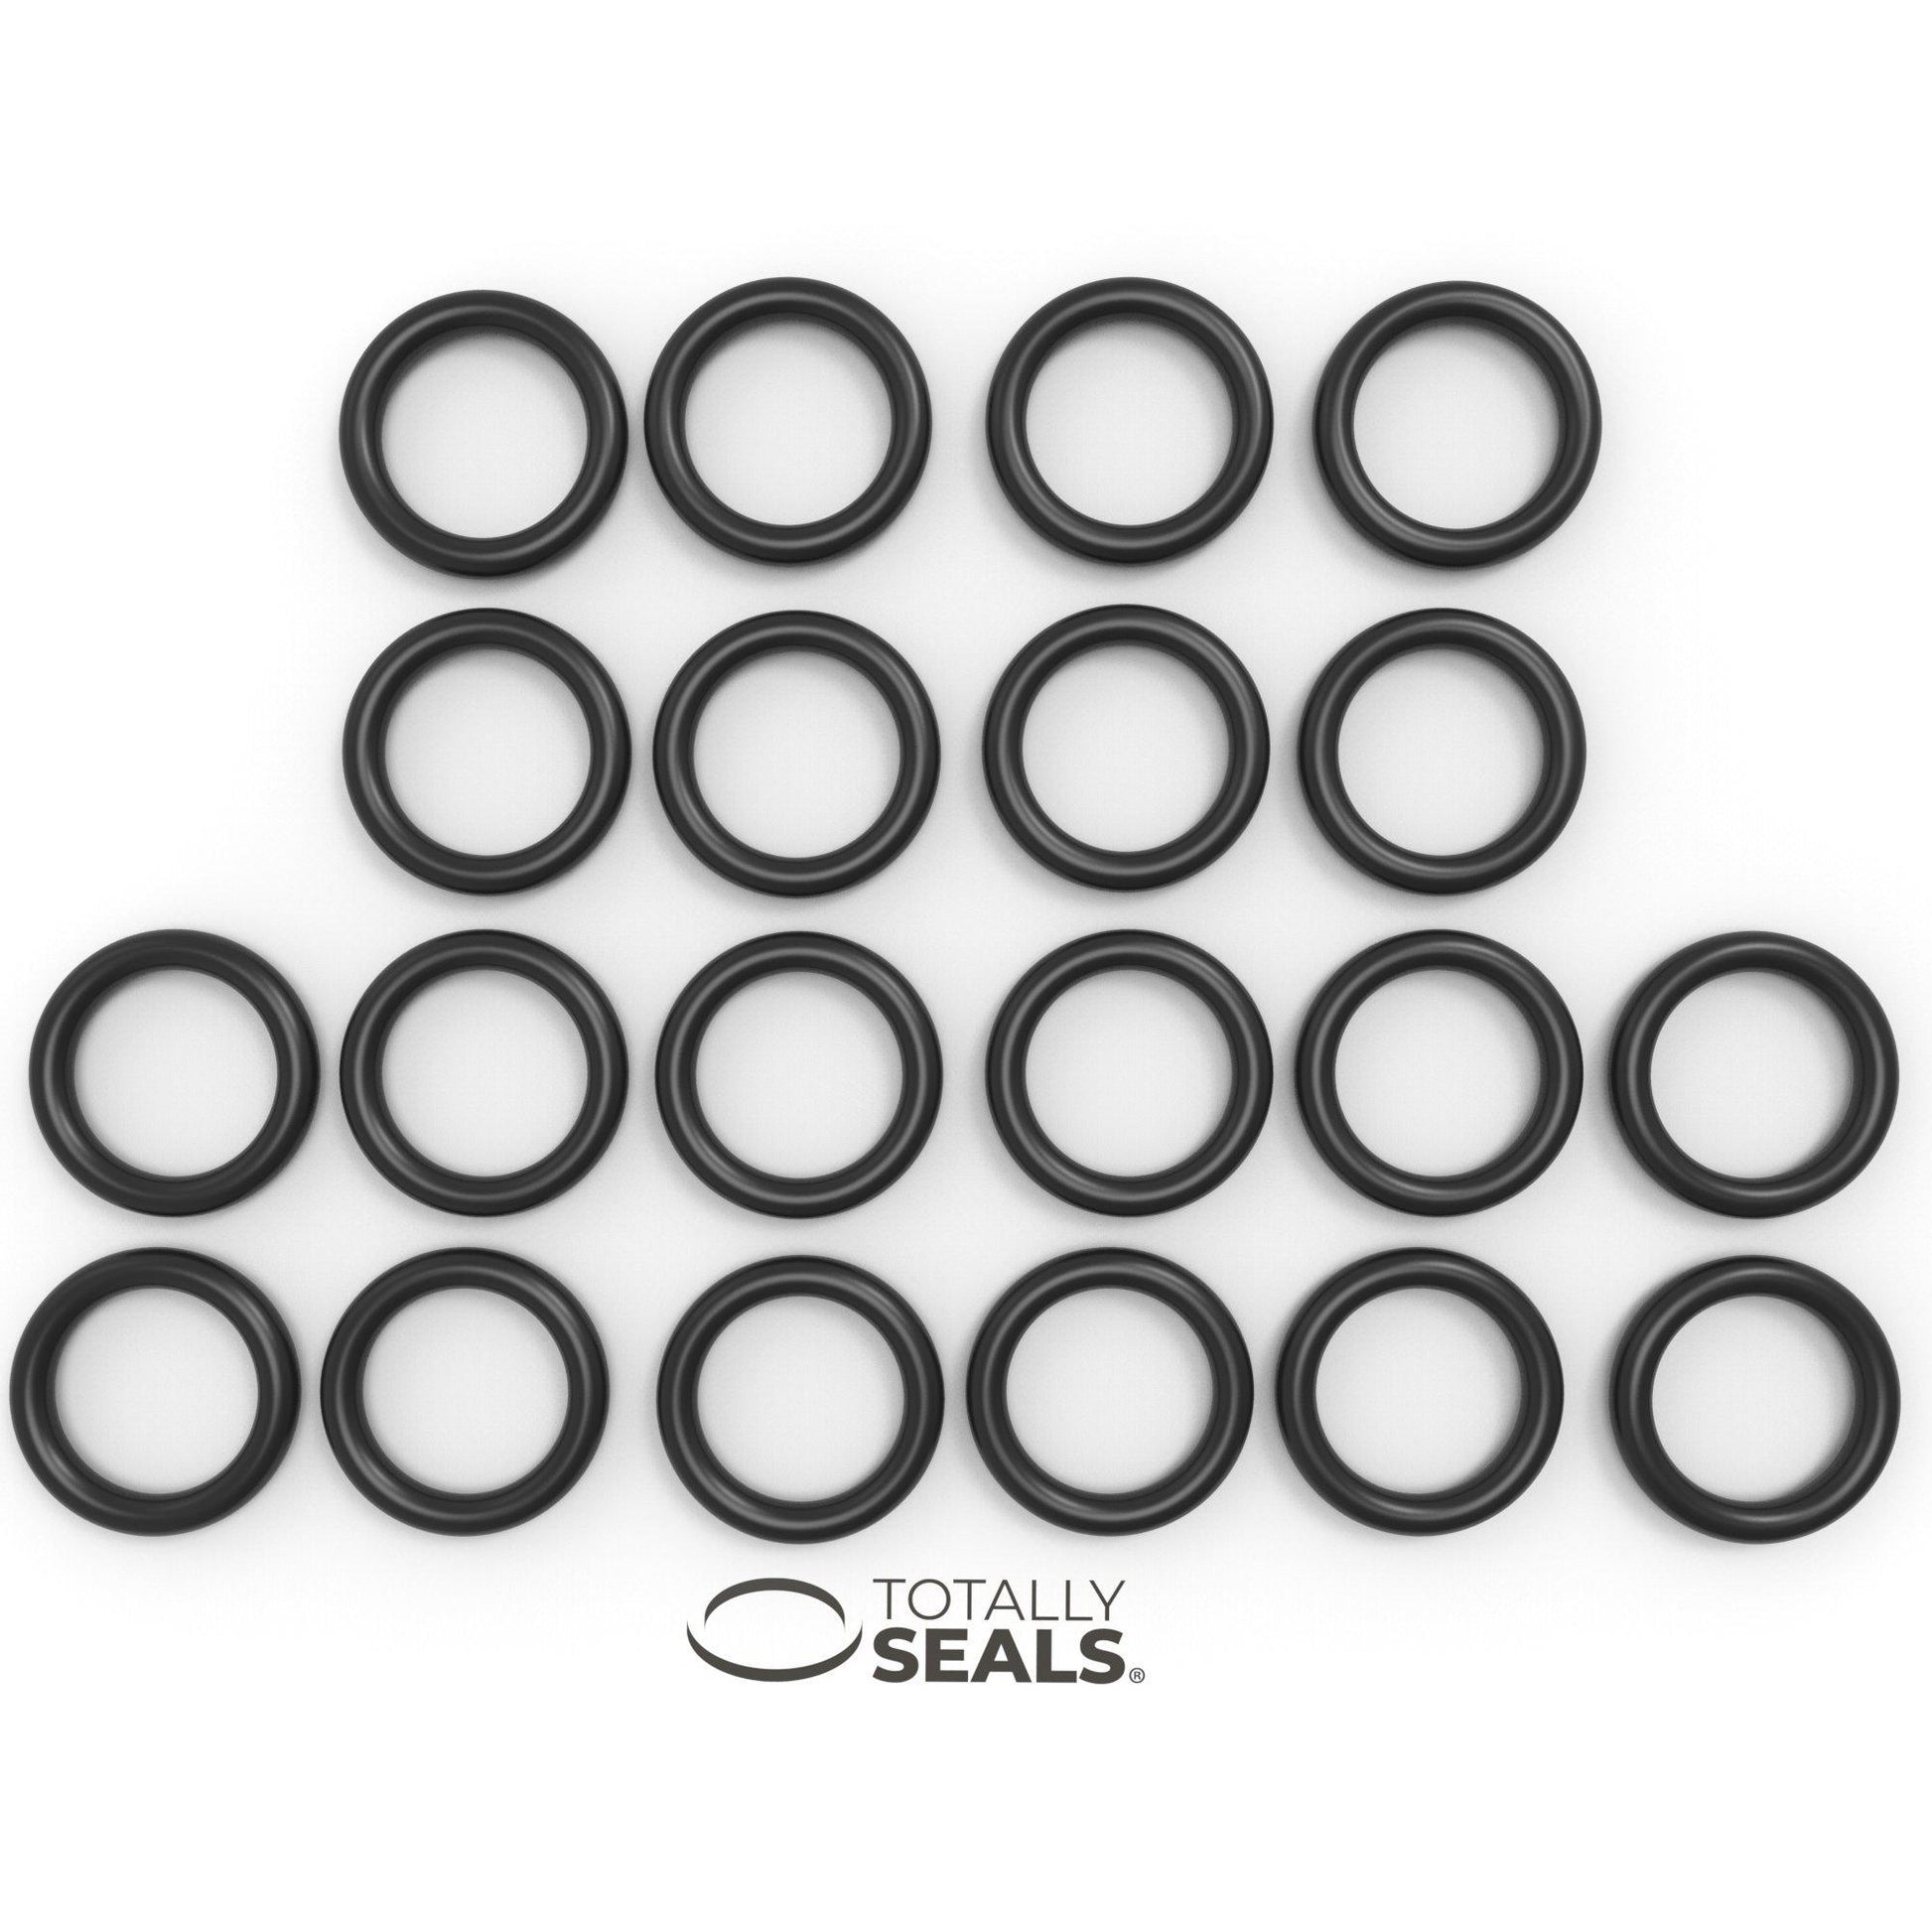 34mm x 2mm (38mm OD) Nitrile O-Rings - Totally Seals®